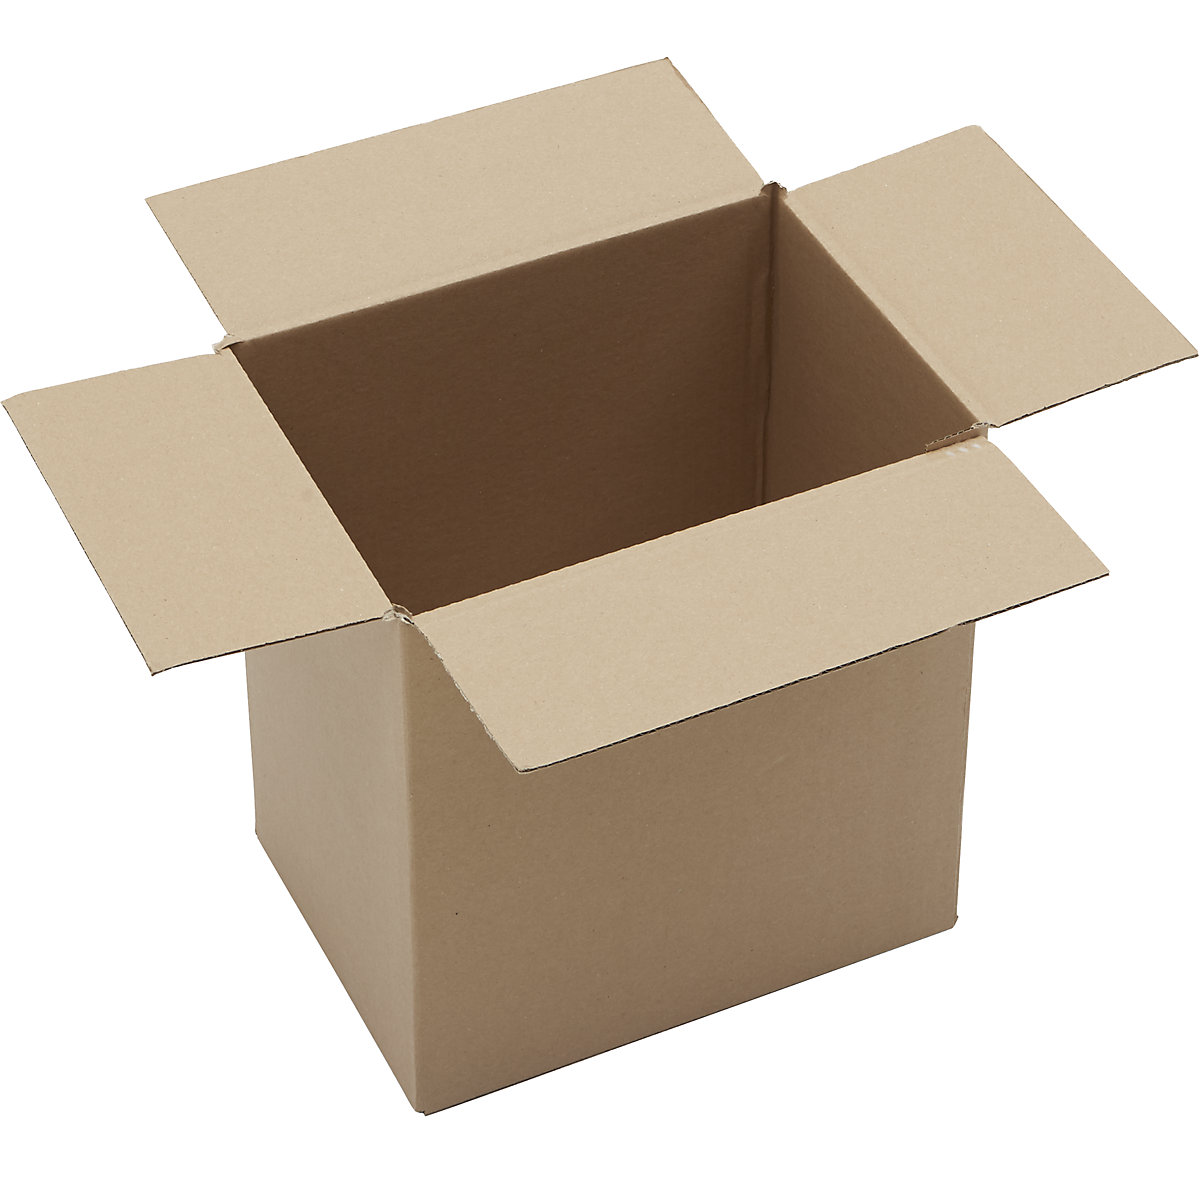 Corrugated cardboard folding boxes, FEFCO 0201, single fluted, pack of 50, internal dimensions 275 x 200 x 300 mm-3